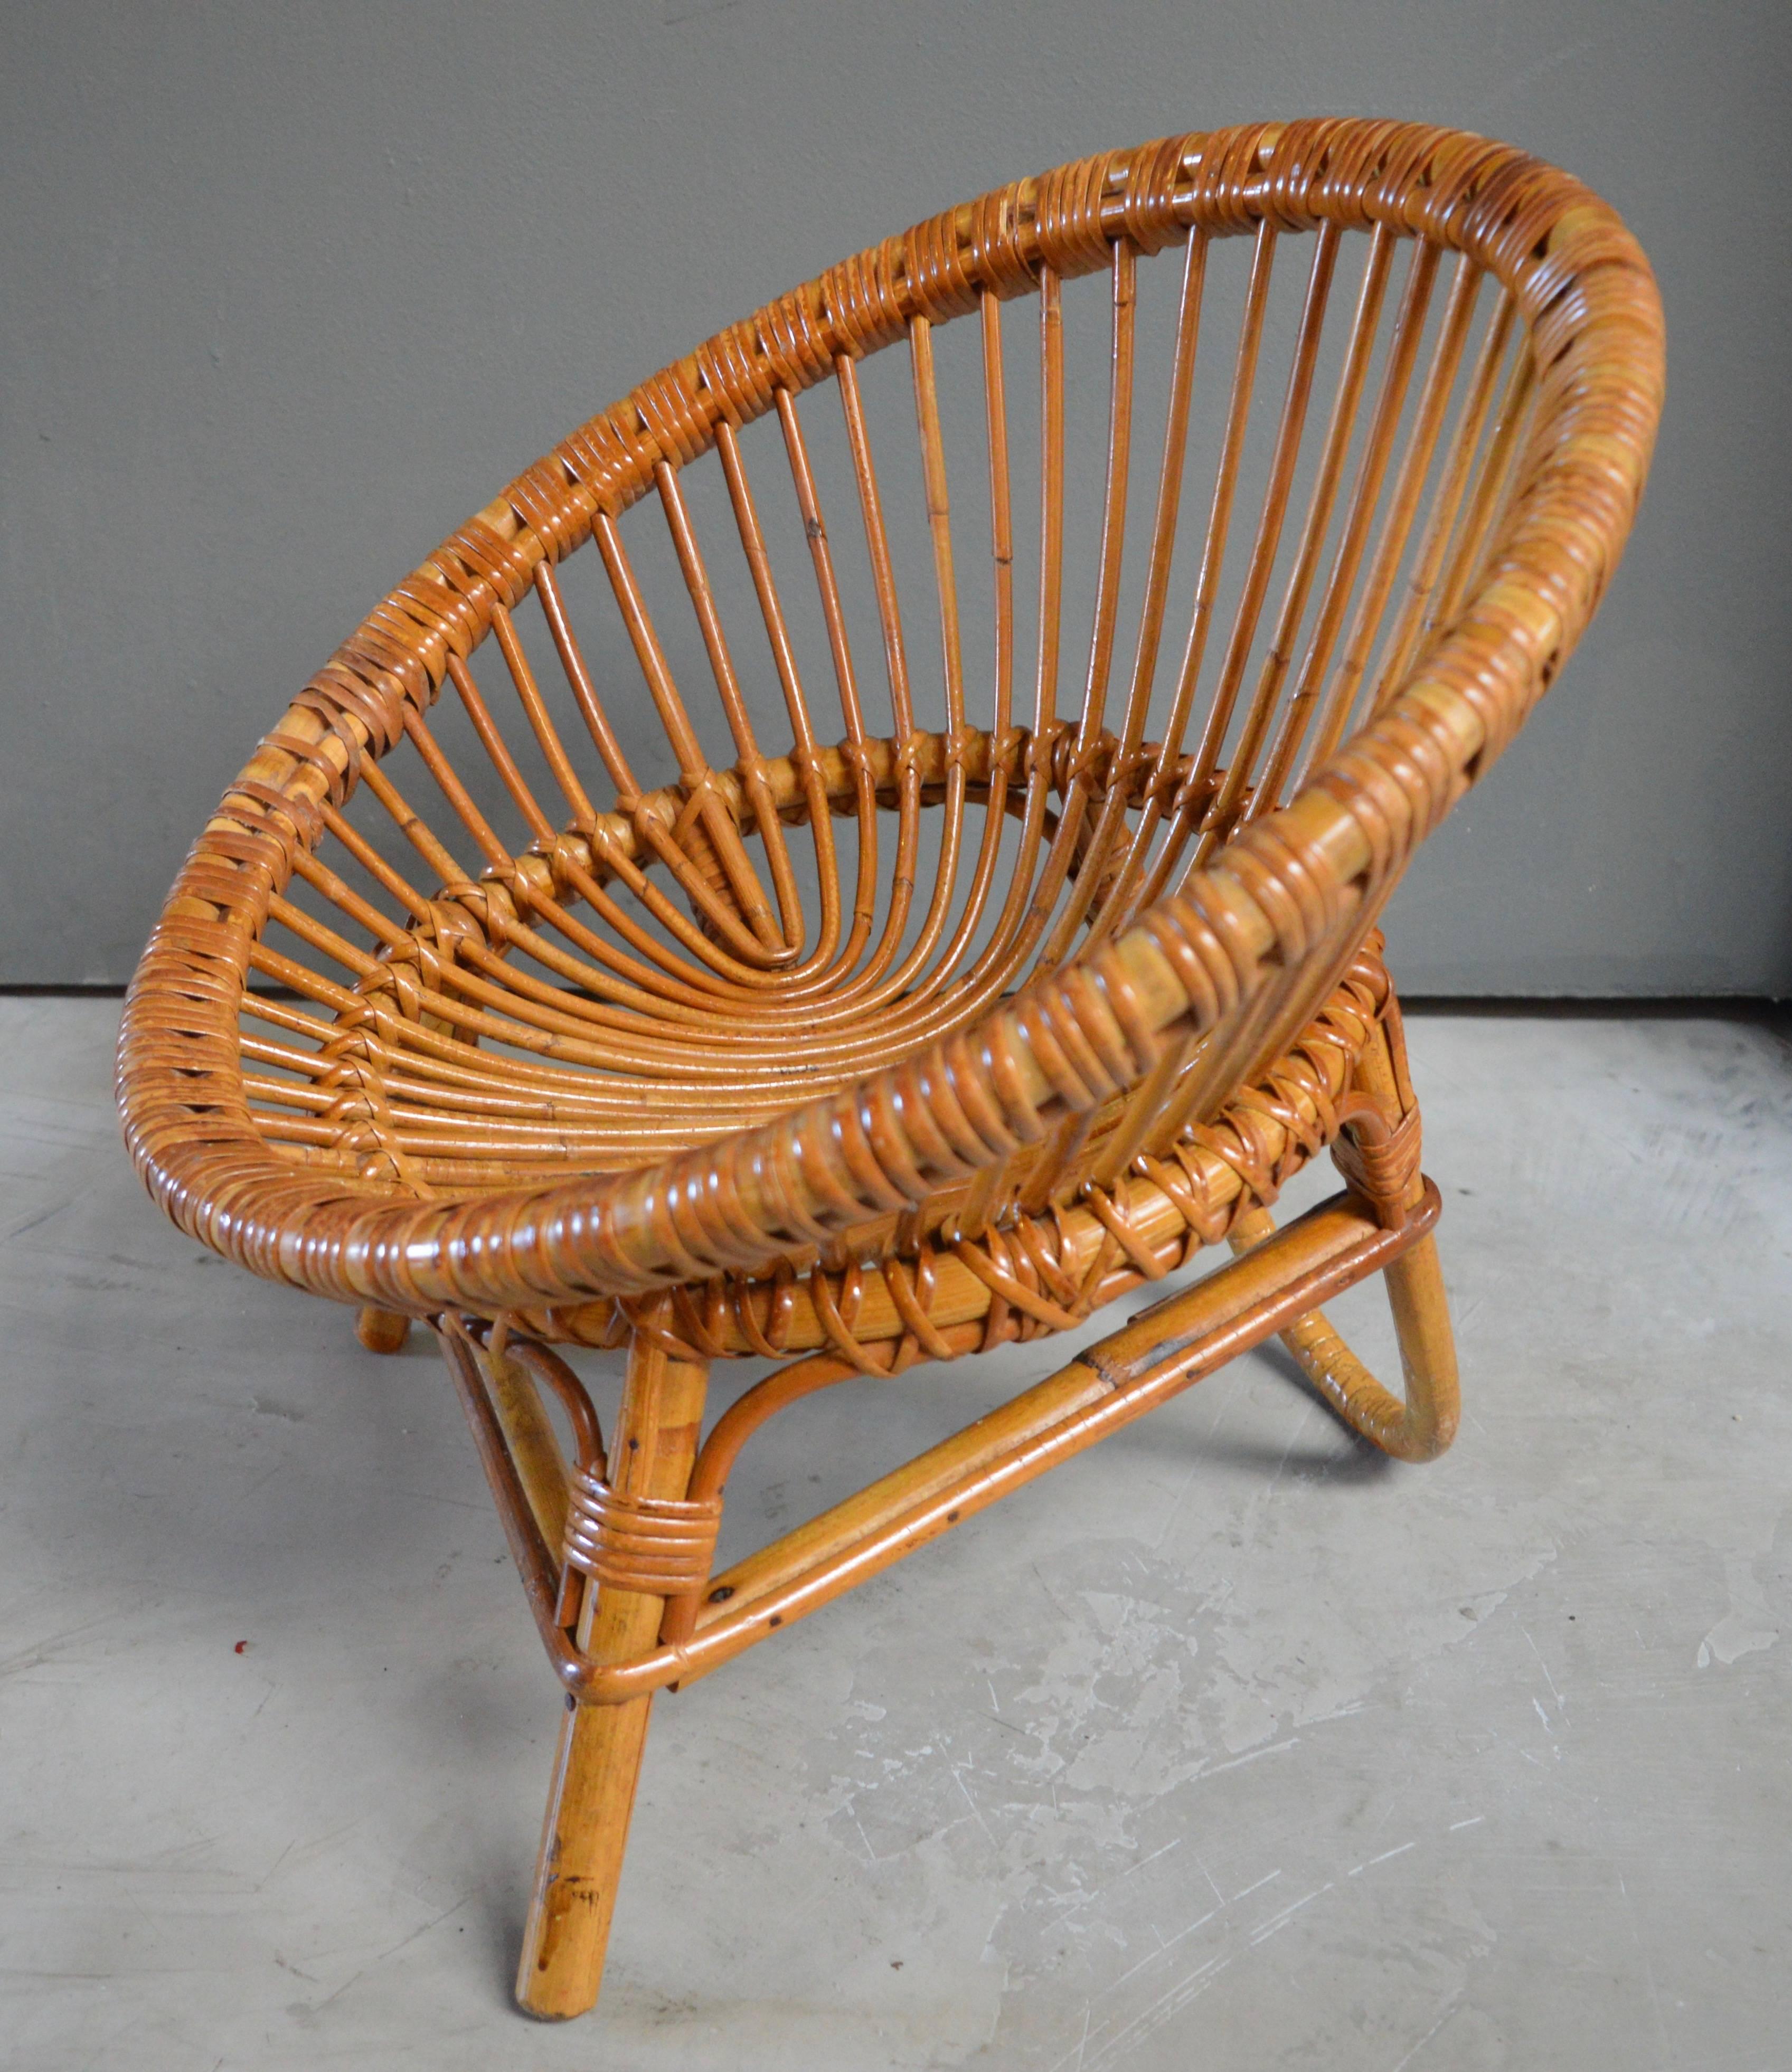 Adorable miniature French rattan and bamboo scoop chair. Perfect for a children's room. Excellent vintage condition.